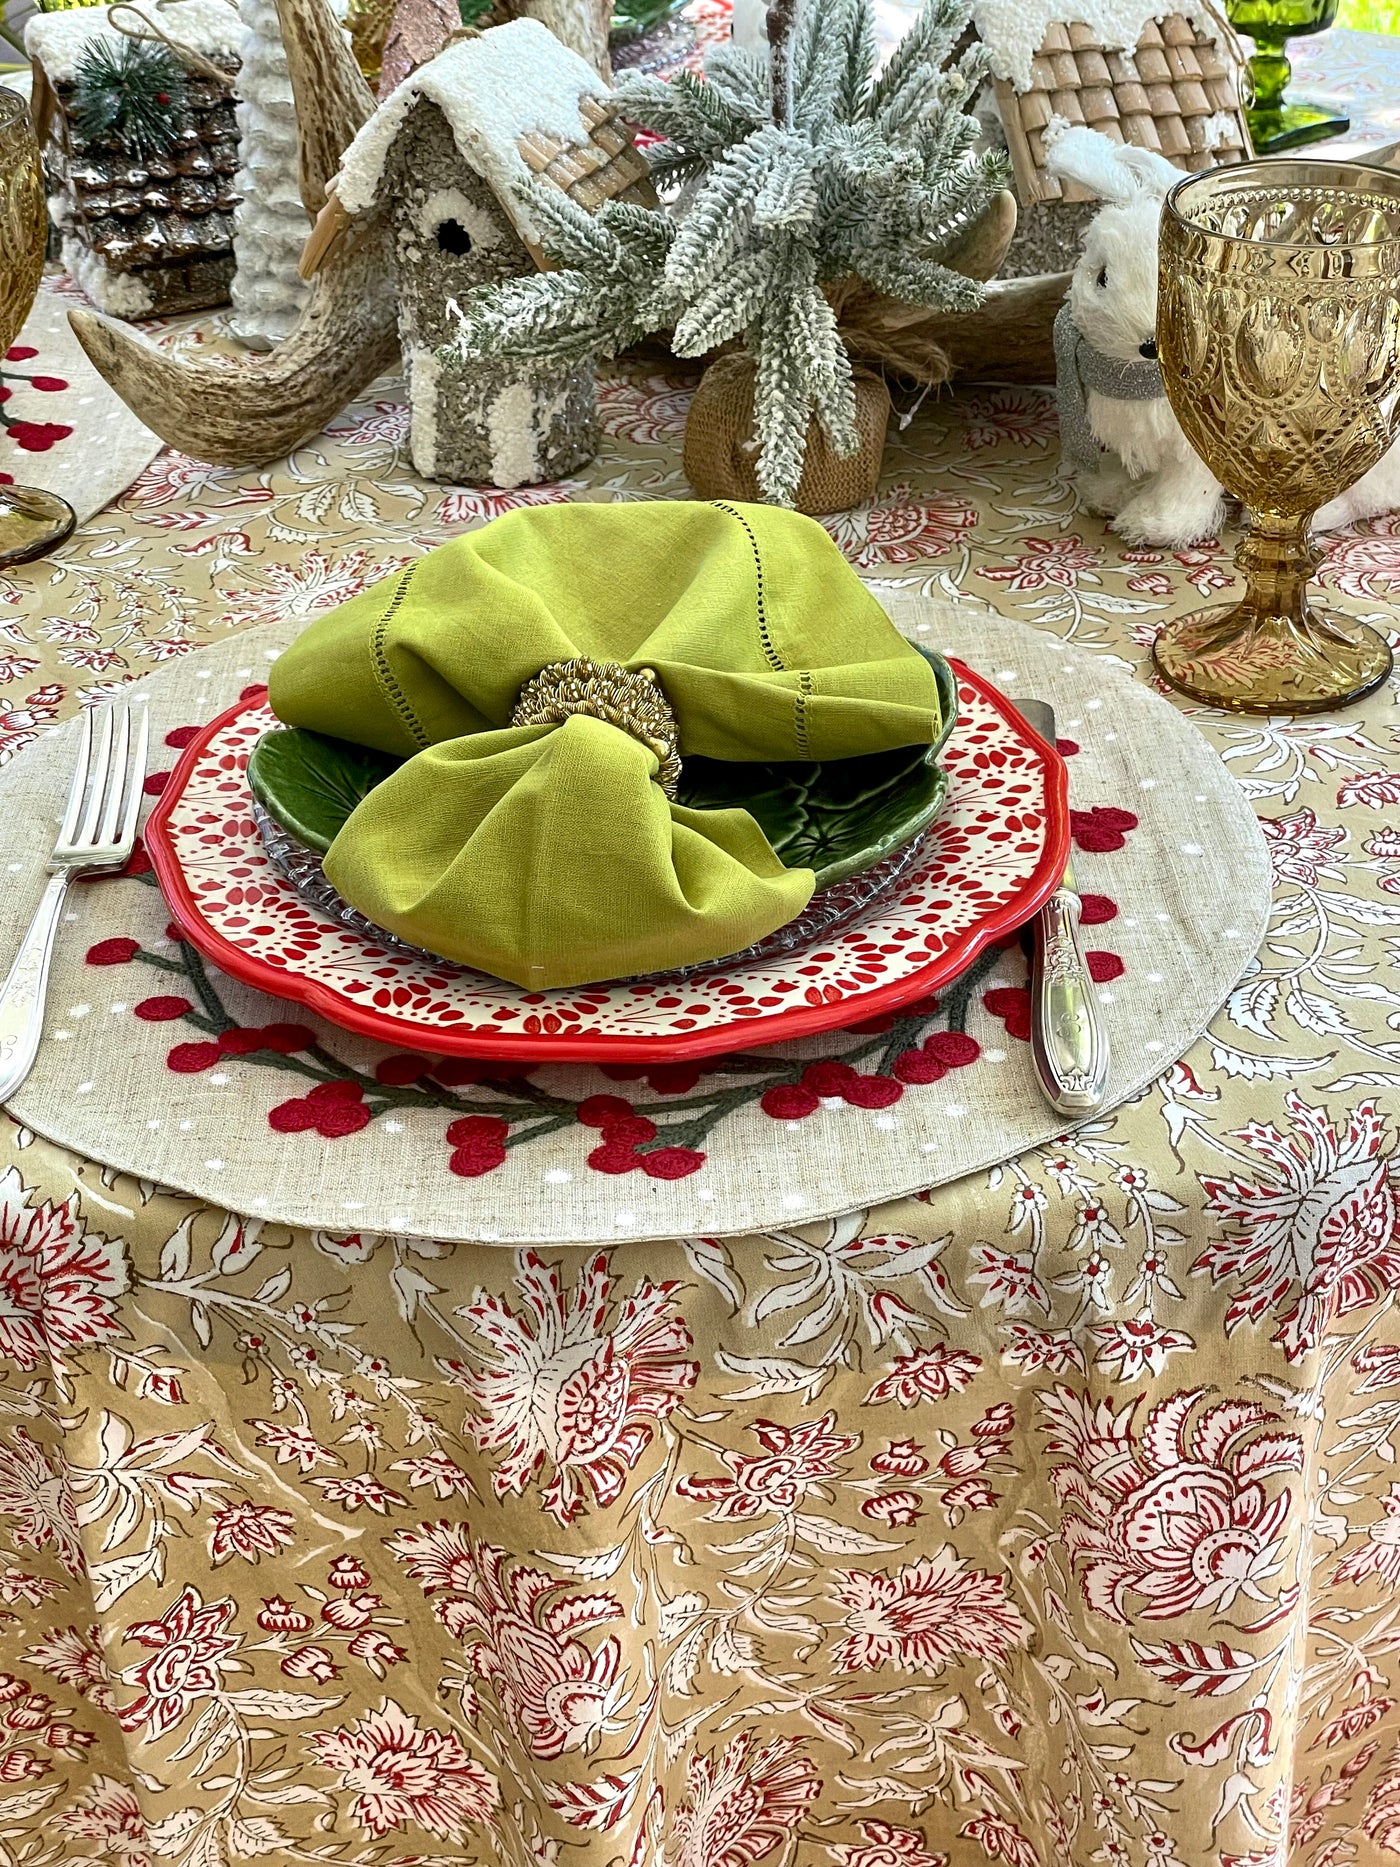 The Candy Cane Tablecloth